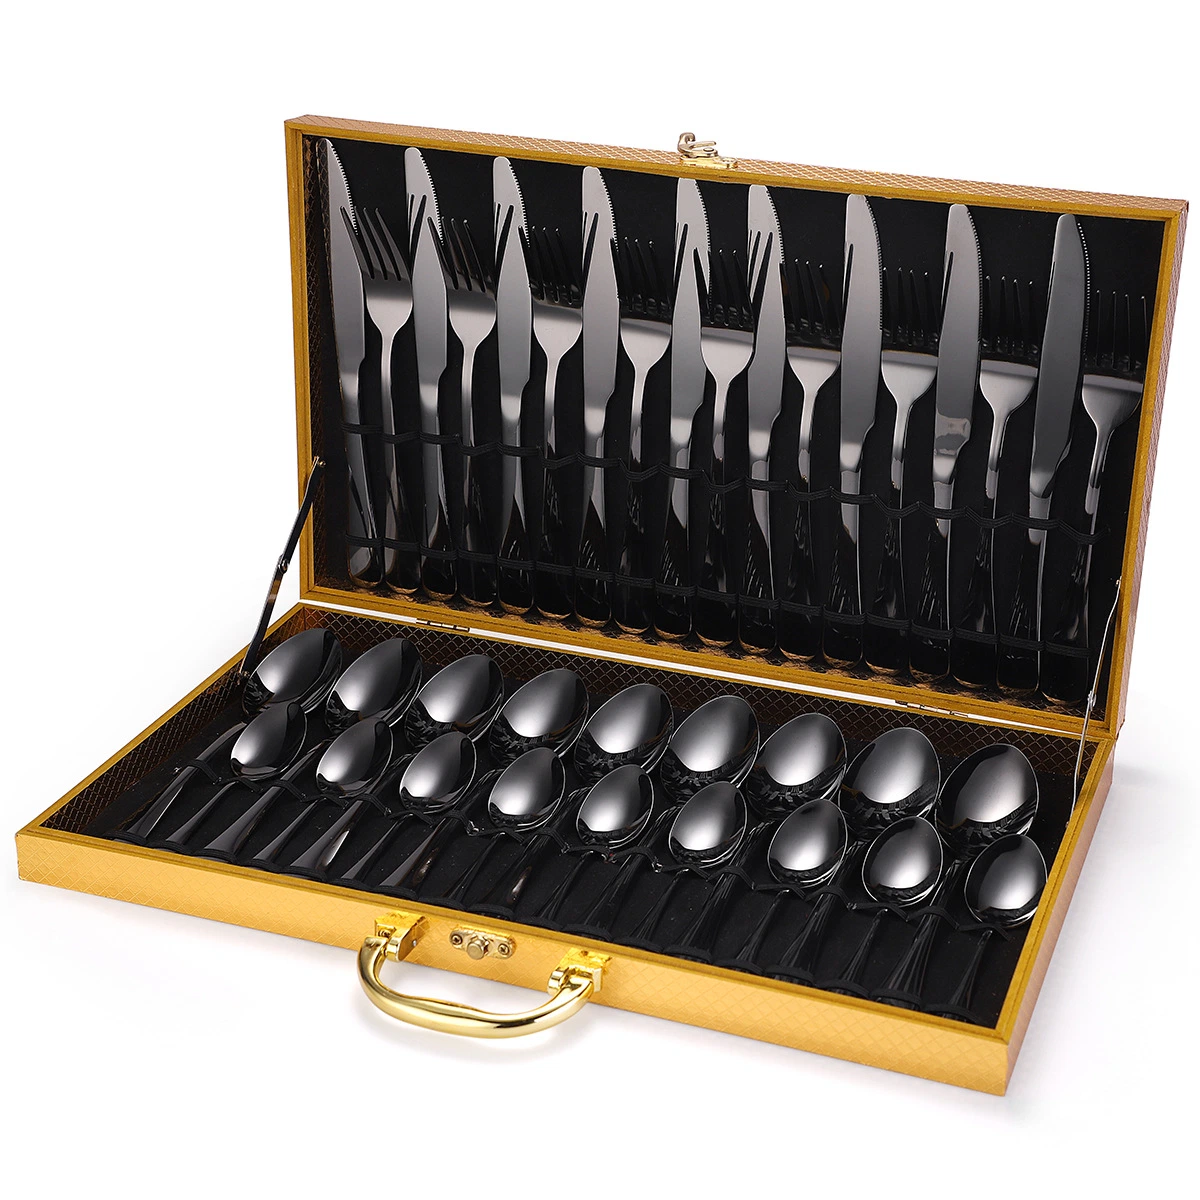 36 PCS Wooden Box Package Stainless Steel Gold Cutlery Set